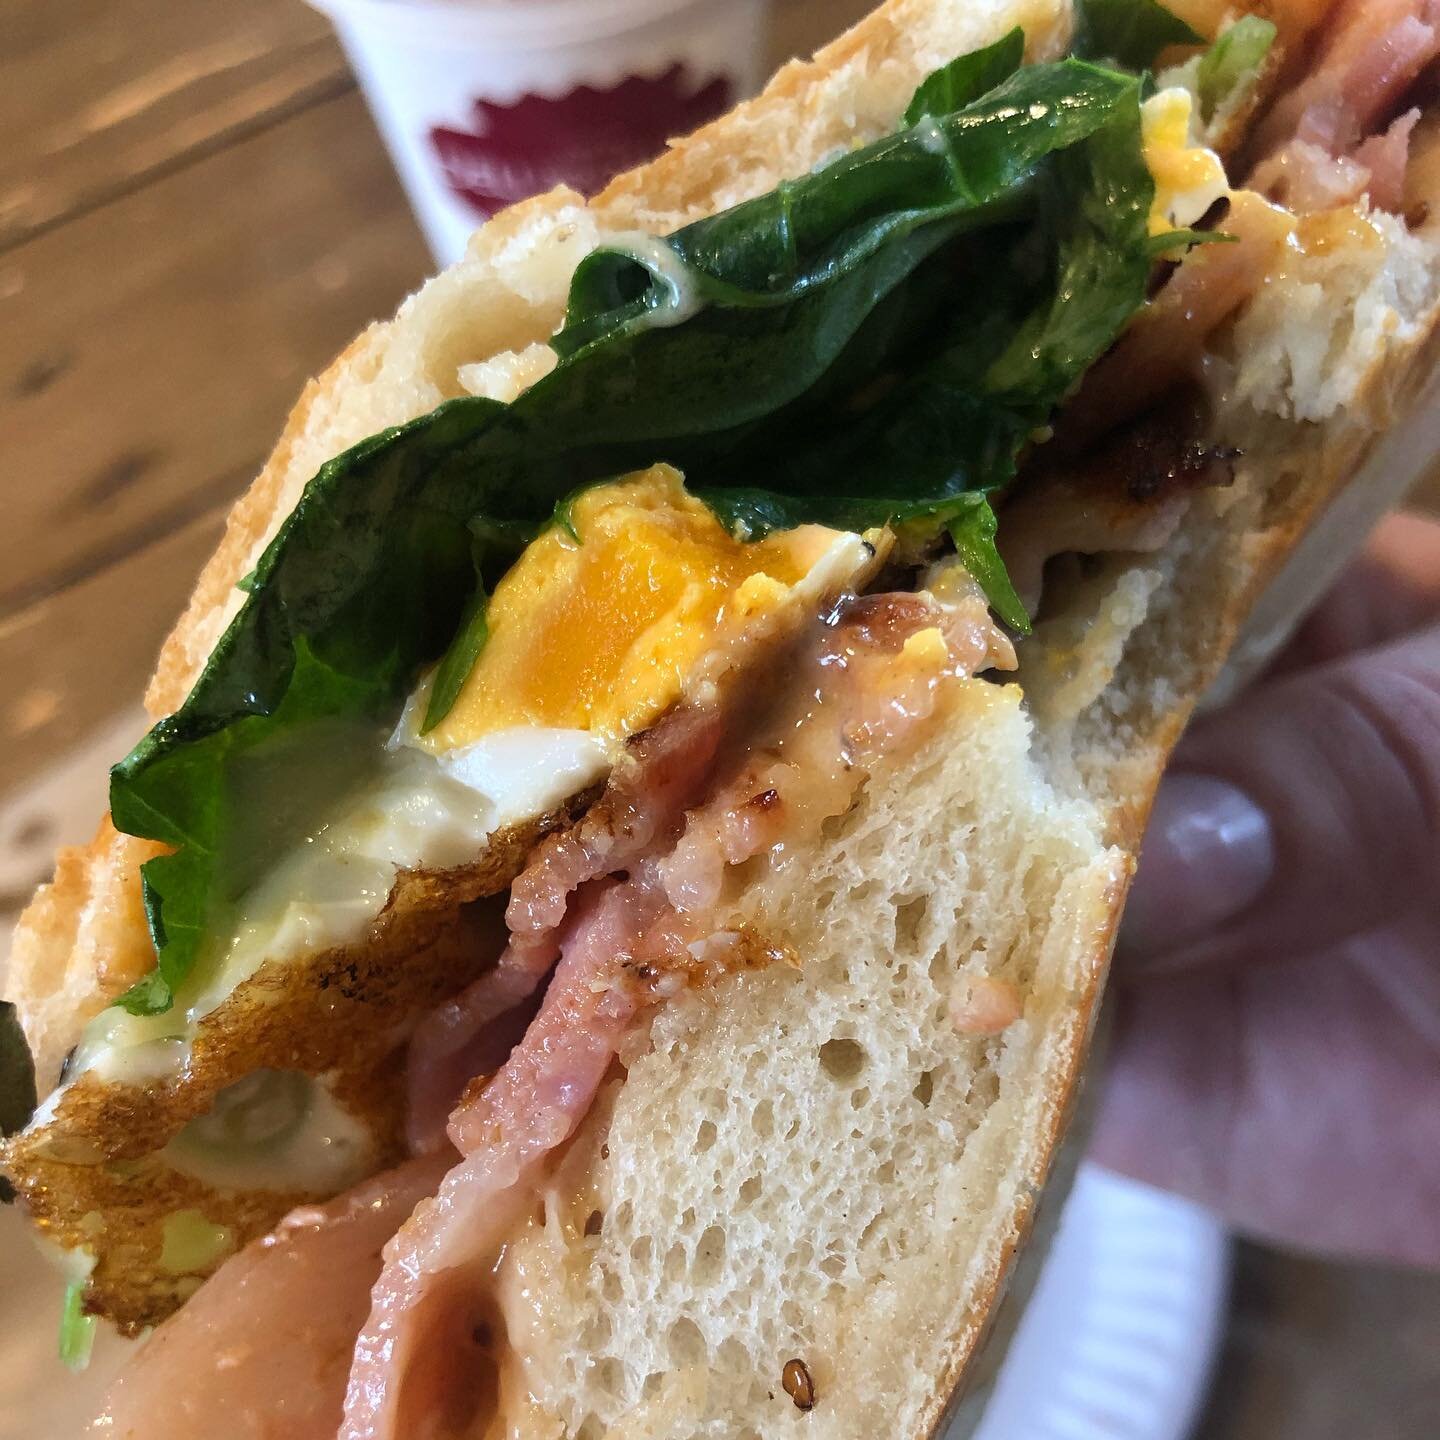 Deli Brothers is a Hobsonville local favourite and home to one of my favourite breakfast sandwiches. You&rsquo;ll see me at Deli Bros at least once a week for a coffee and sandwich. The cafe is unassuming place located next to a local produce market.